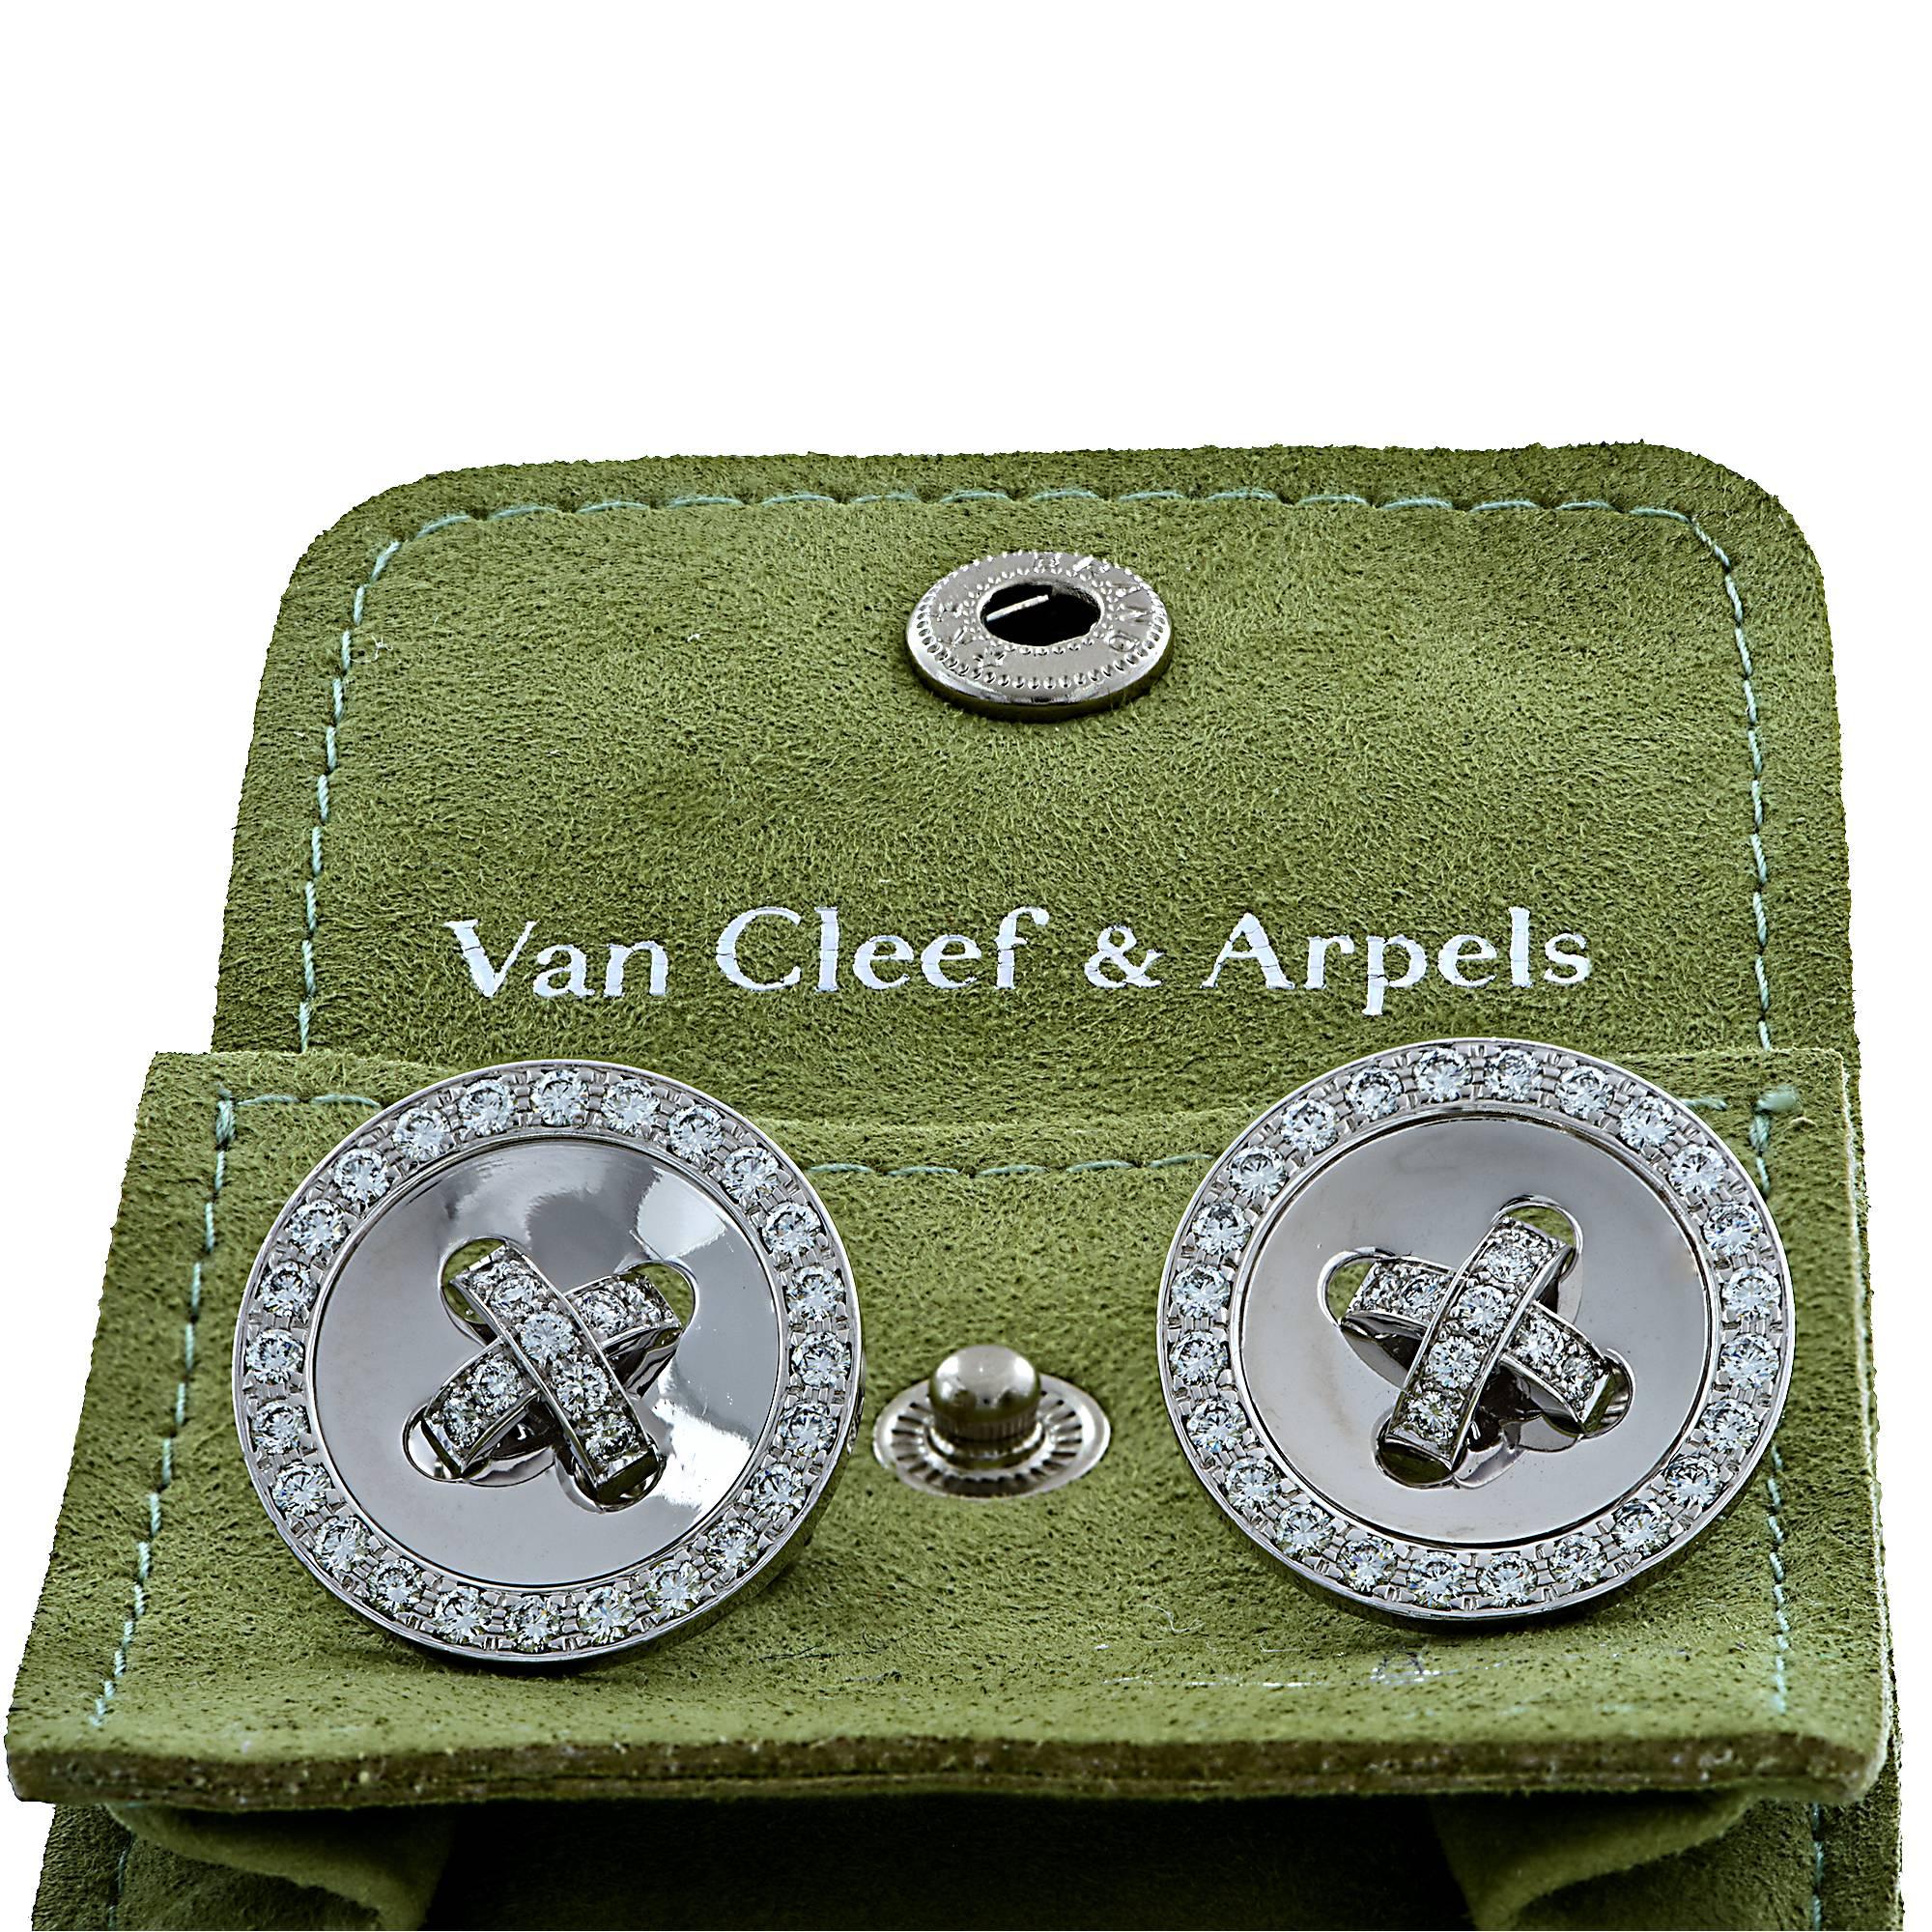 18k white gold Van Cleef & Arpels button earrings featuring 66 round brilliant cut diamonds weighing approximately 1.9cts total F color VS clarity.

Measure 20.5mm in diameter 
It is stamped and/or tested as 18k gold.
The metal weight is 16.40